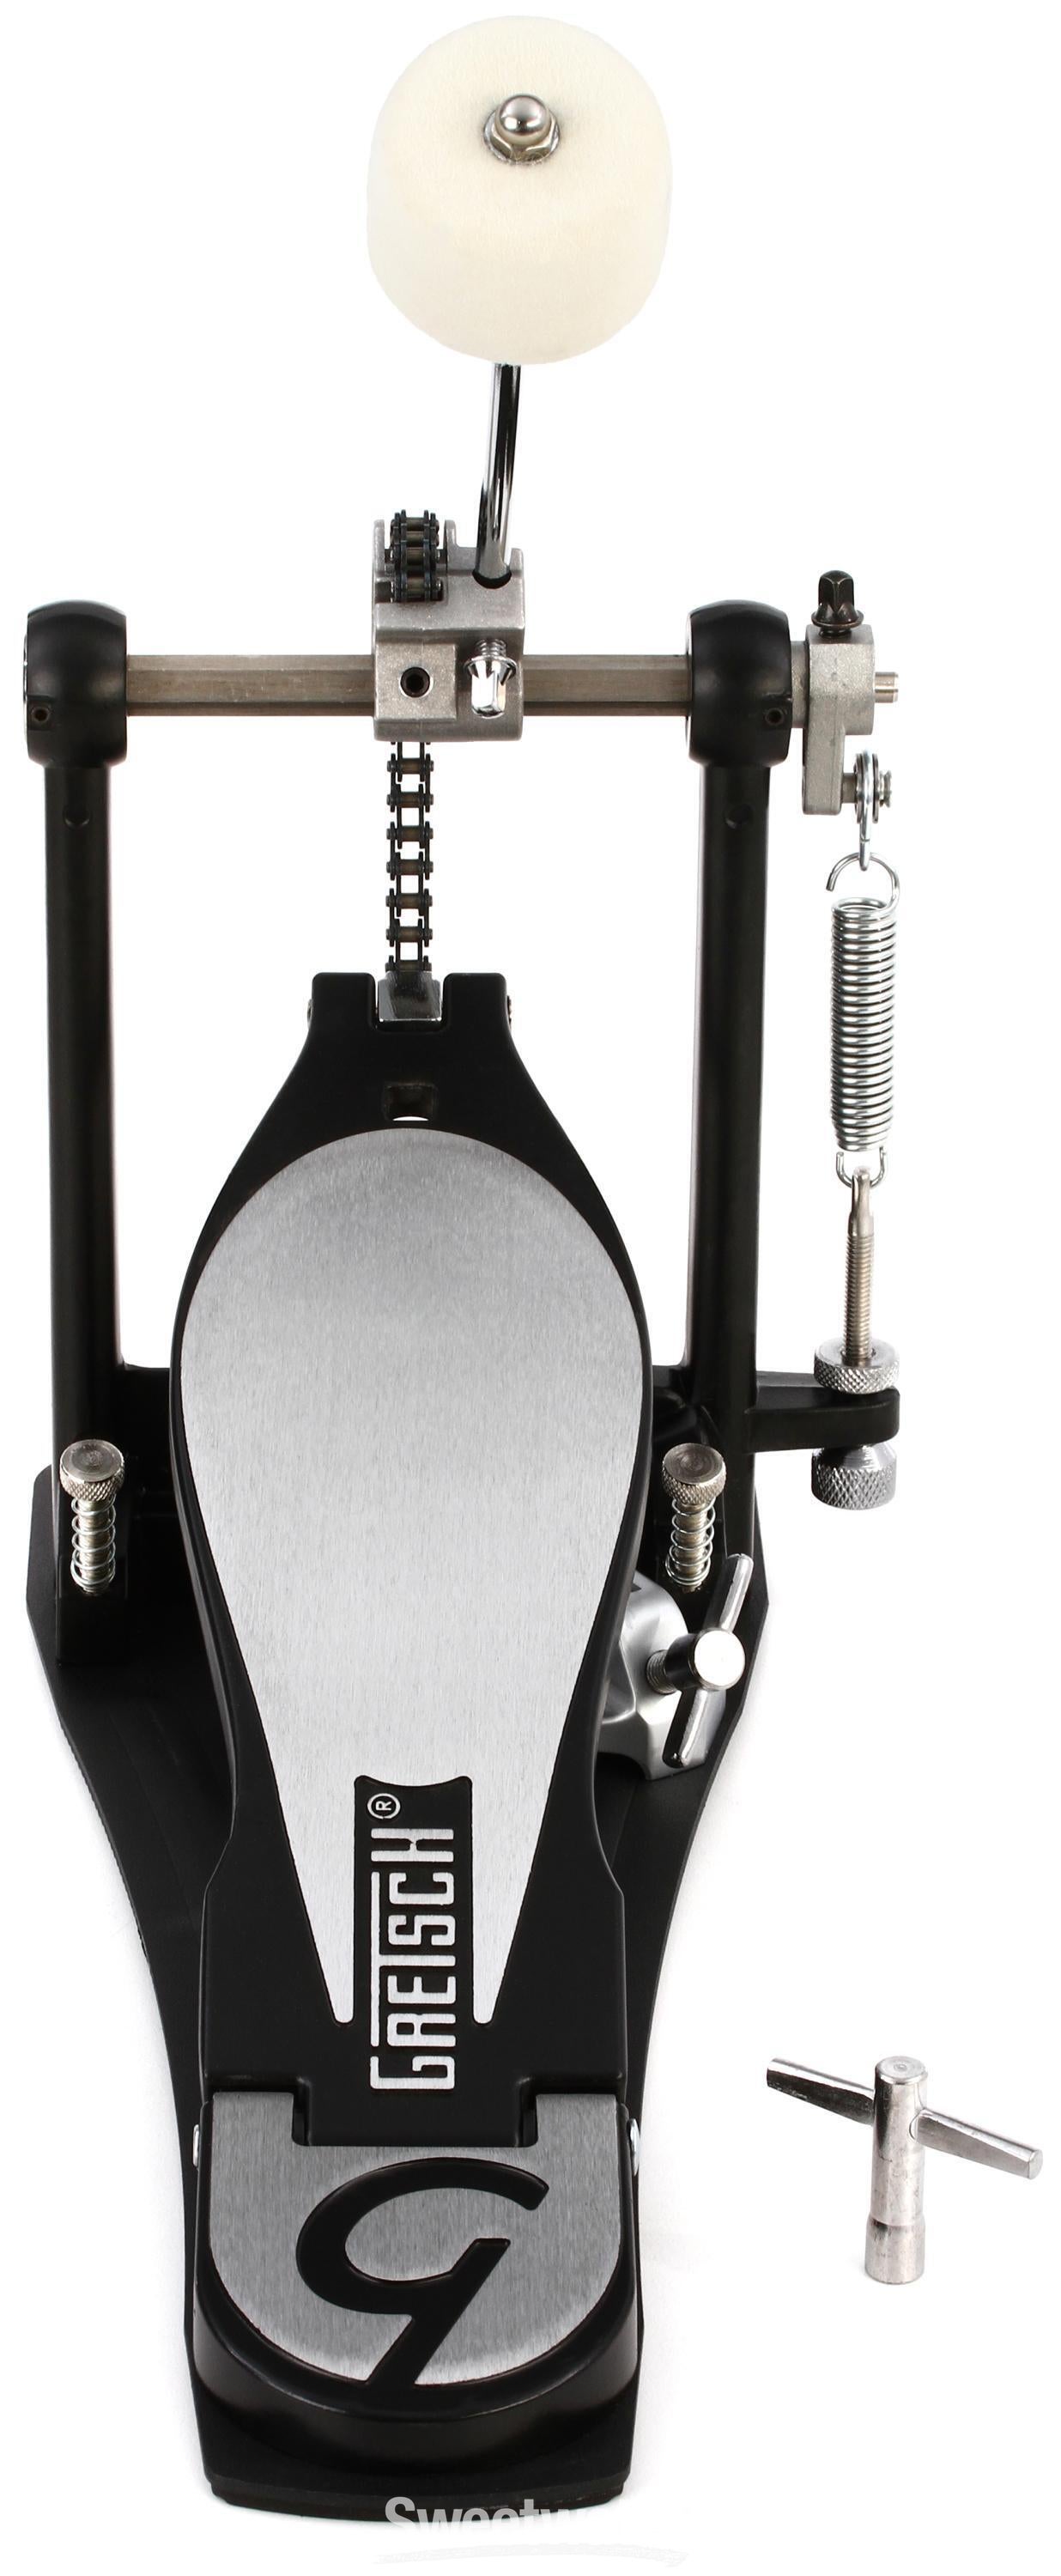 Gretsch Drums G3 Single Bass Drum Pedal - Single Chain | Sweetwater